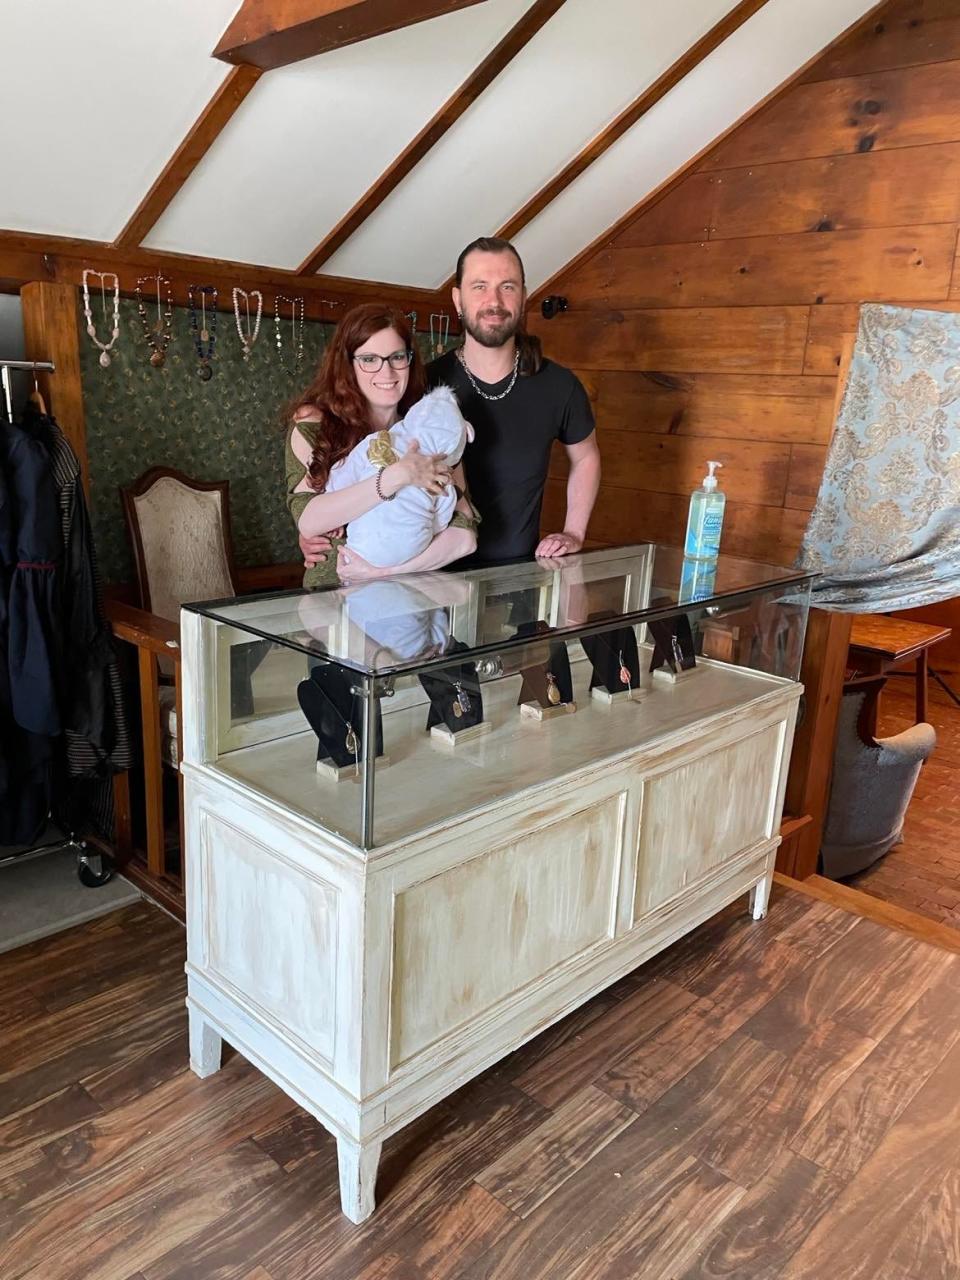 Dave & Serena (Star) Parsons (and their future shop assistant) recently opened Fox & the Wolf at the Shoppes at Dragon Village in Hopewell. Their shop offers “woodland fantasy inspired” gifts, including jewelry, artwork, crystals and candles. There’s also a photography studio on location.